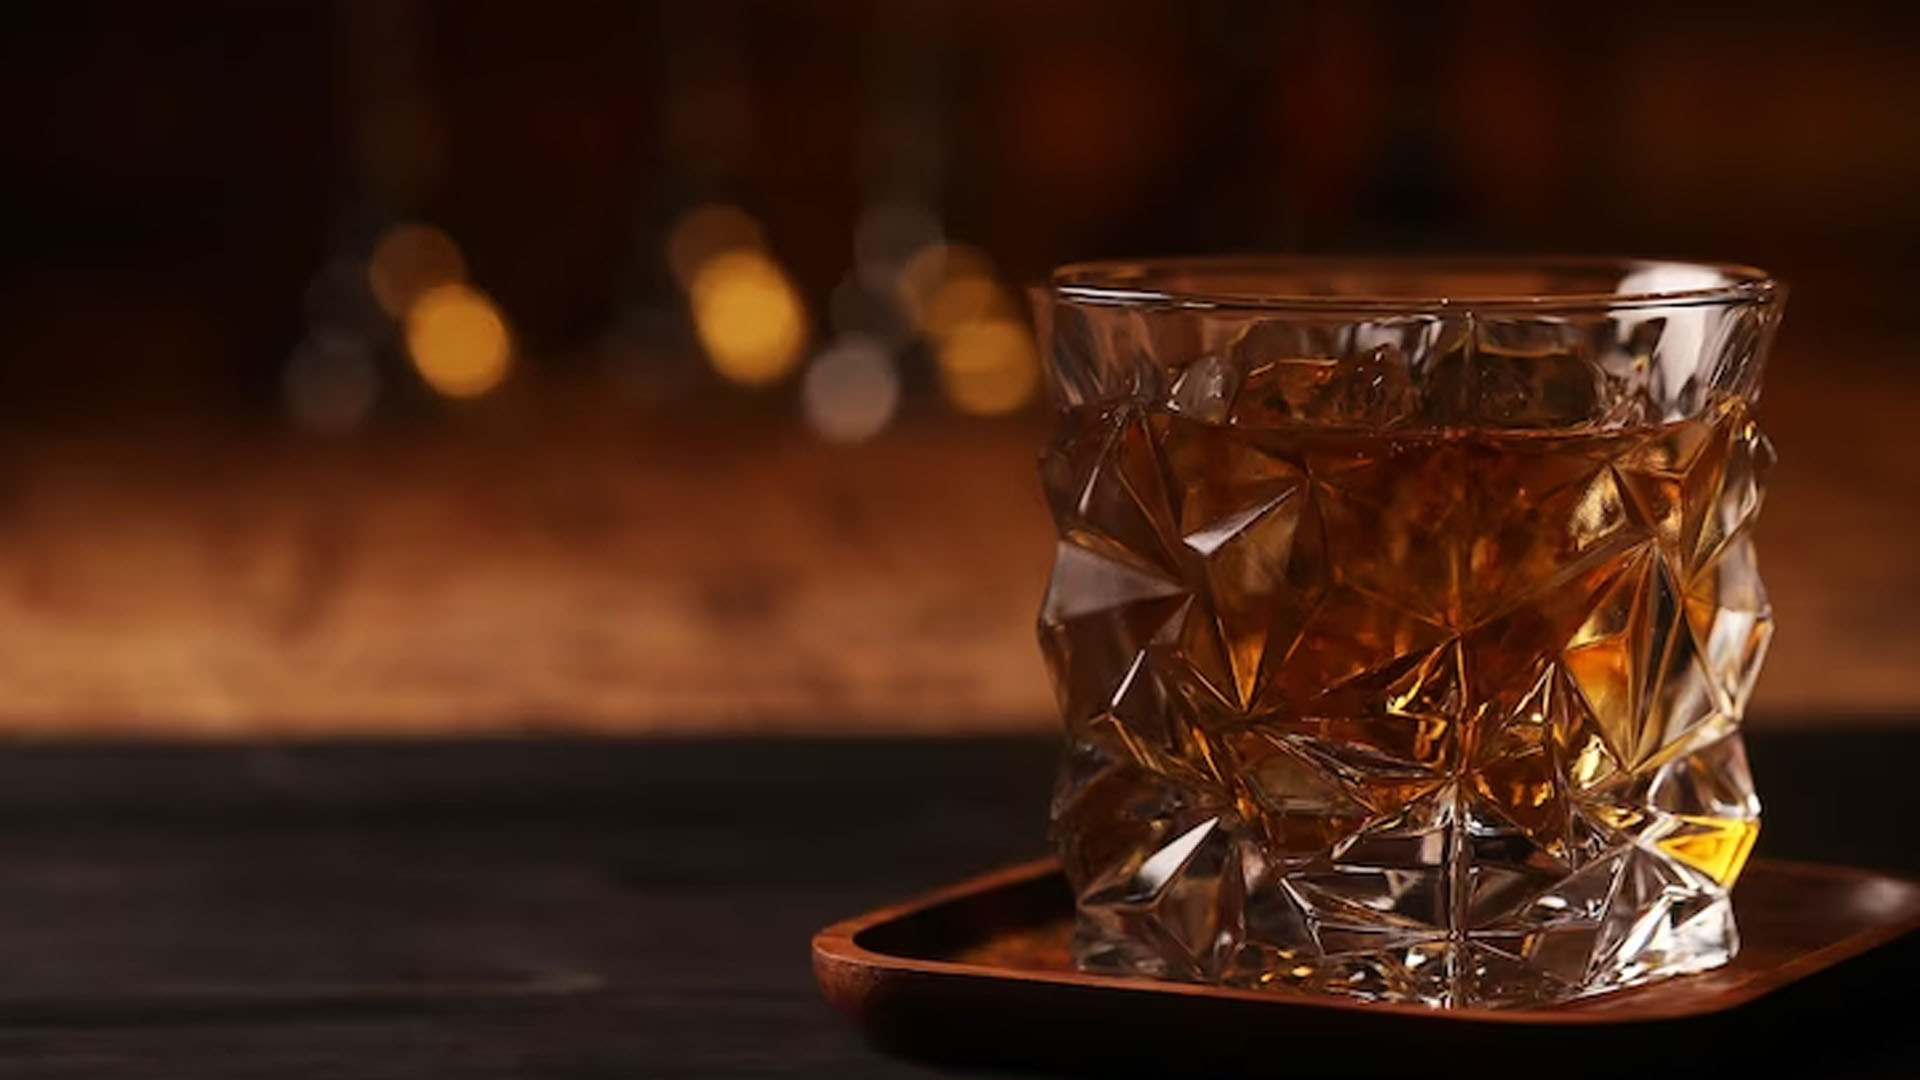 How To Take Whisky For Health Benefits?